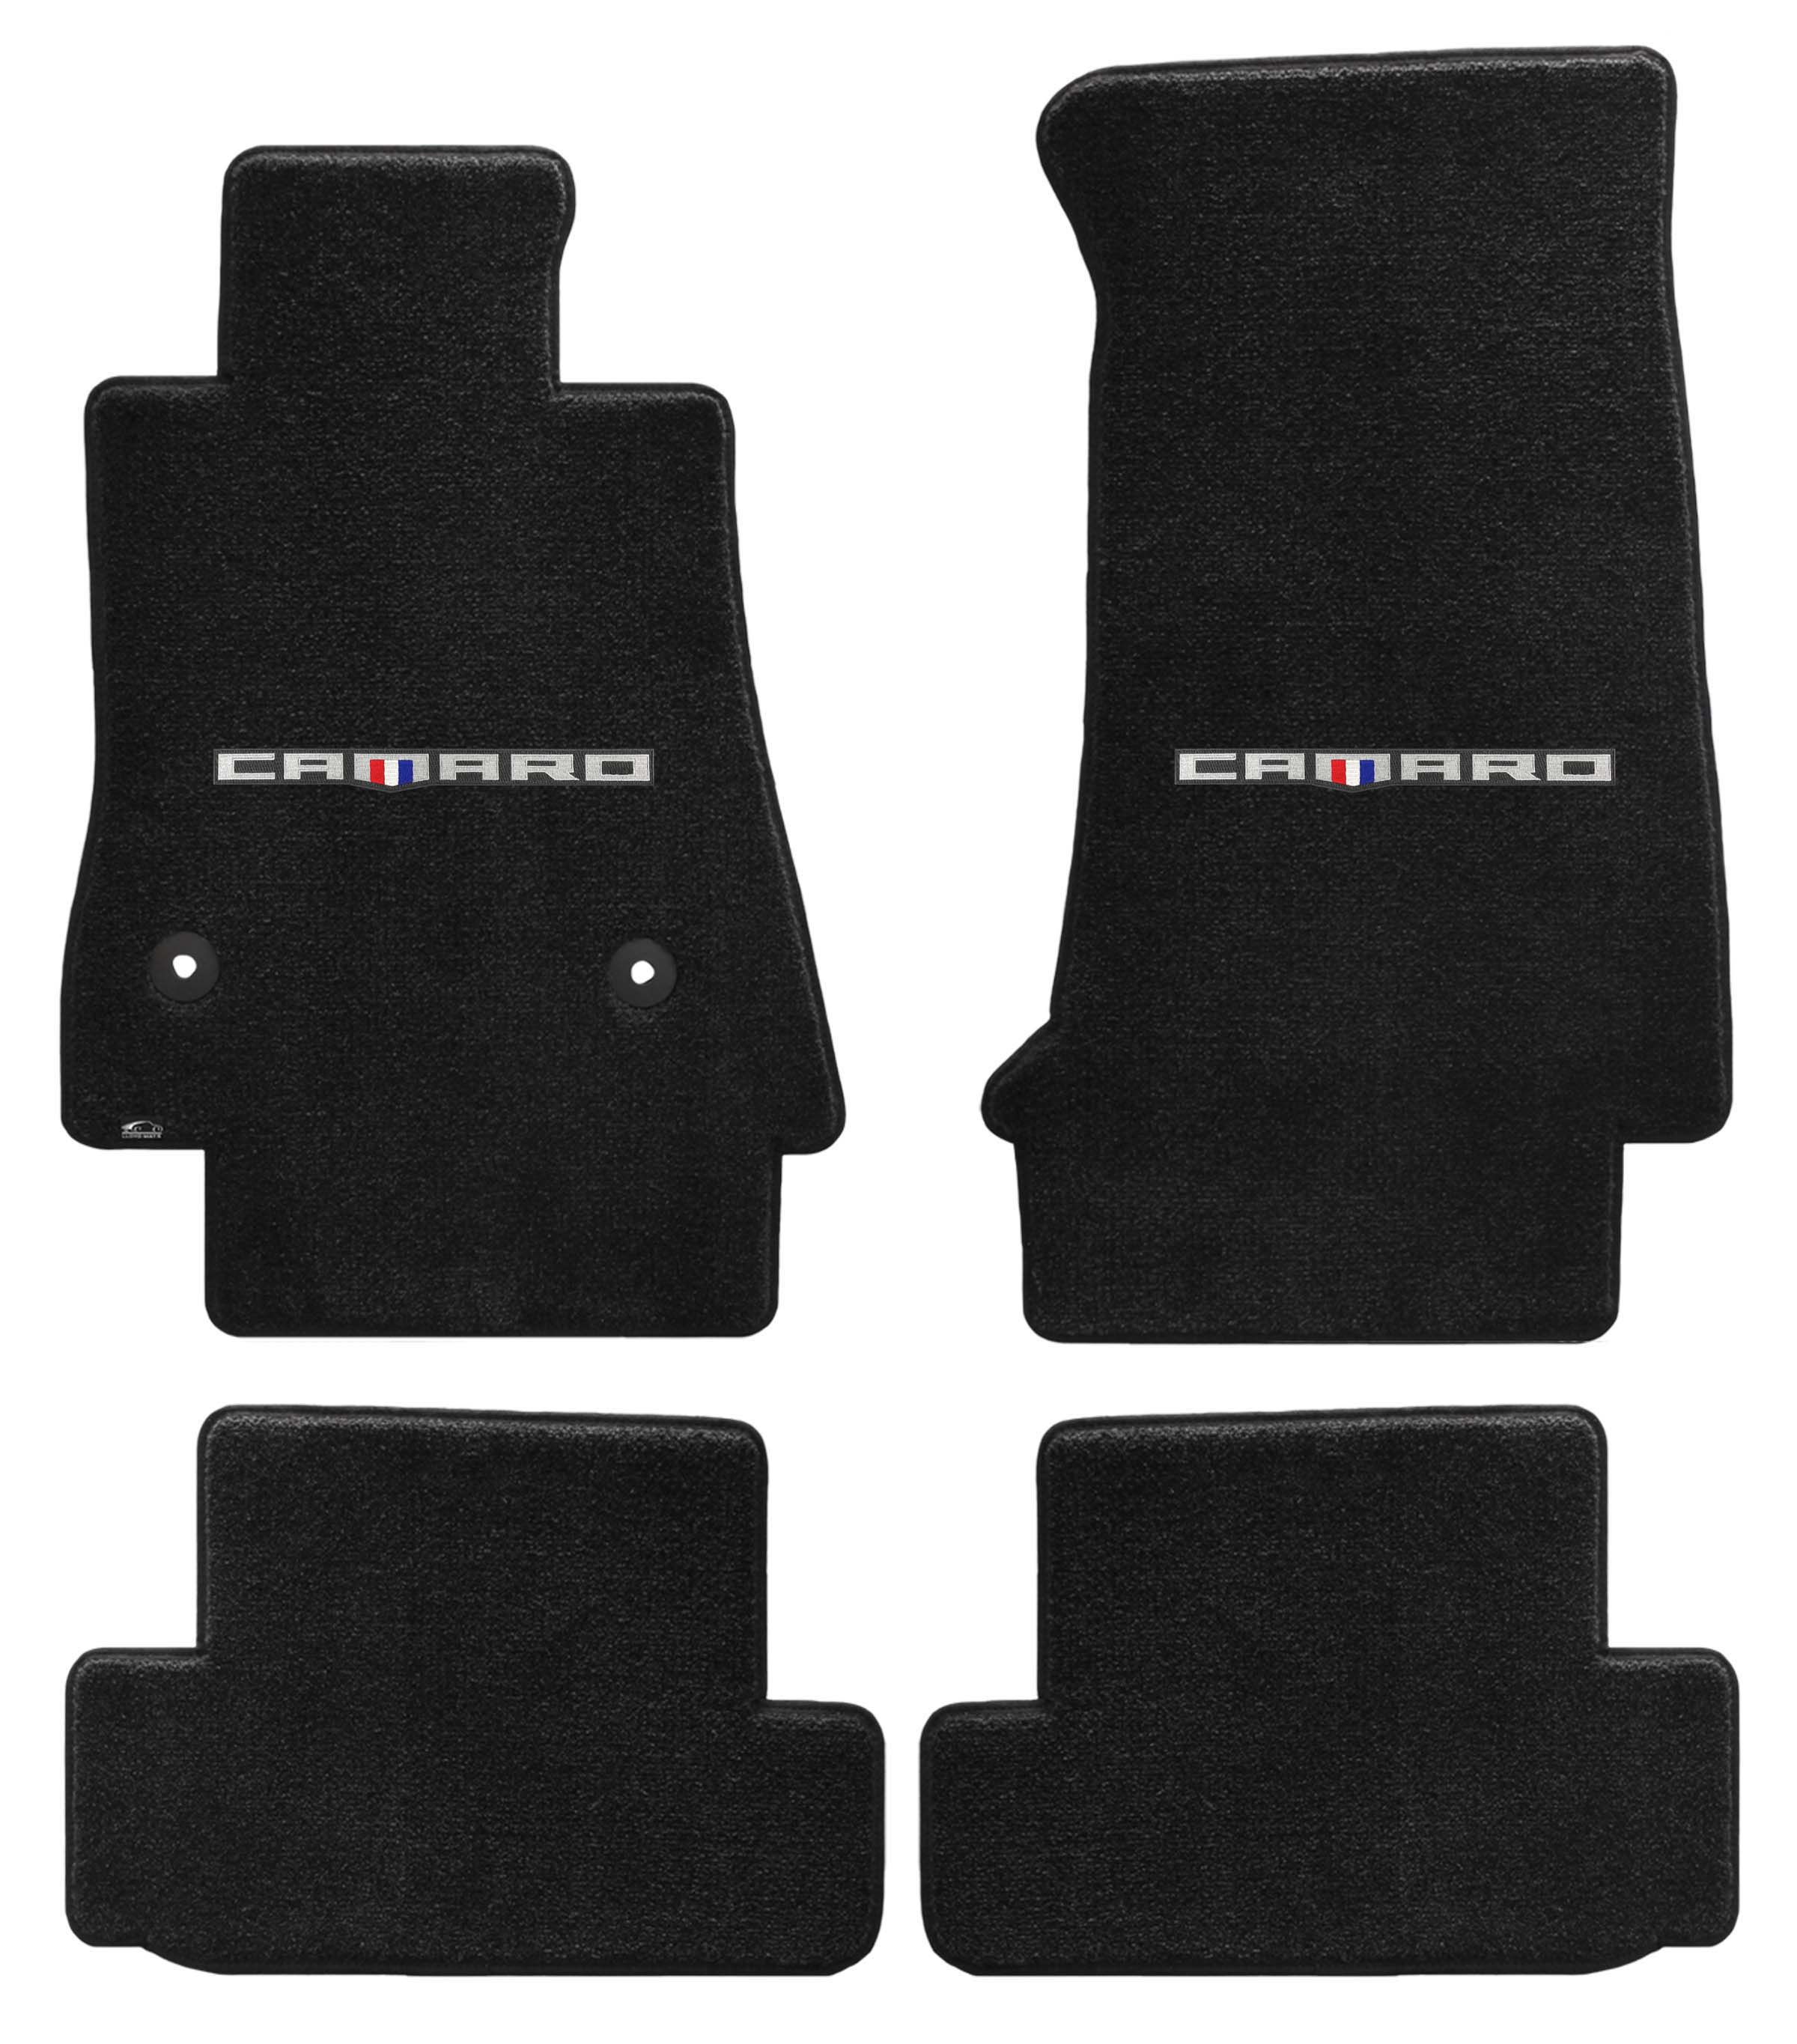 2016+ Camaro Lloyds Ultimat Floor Mats, Front and Rear Pairs with 6th Gen Camaro Word Logo